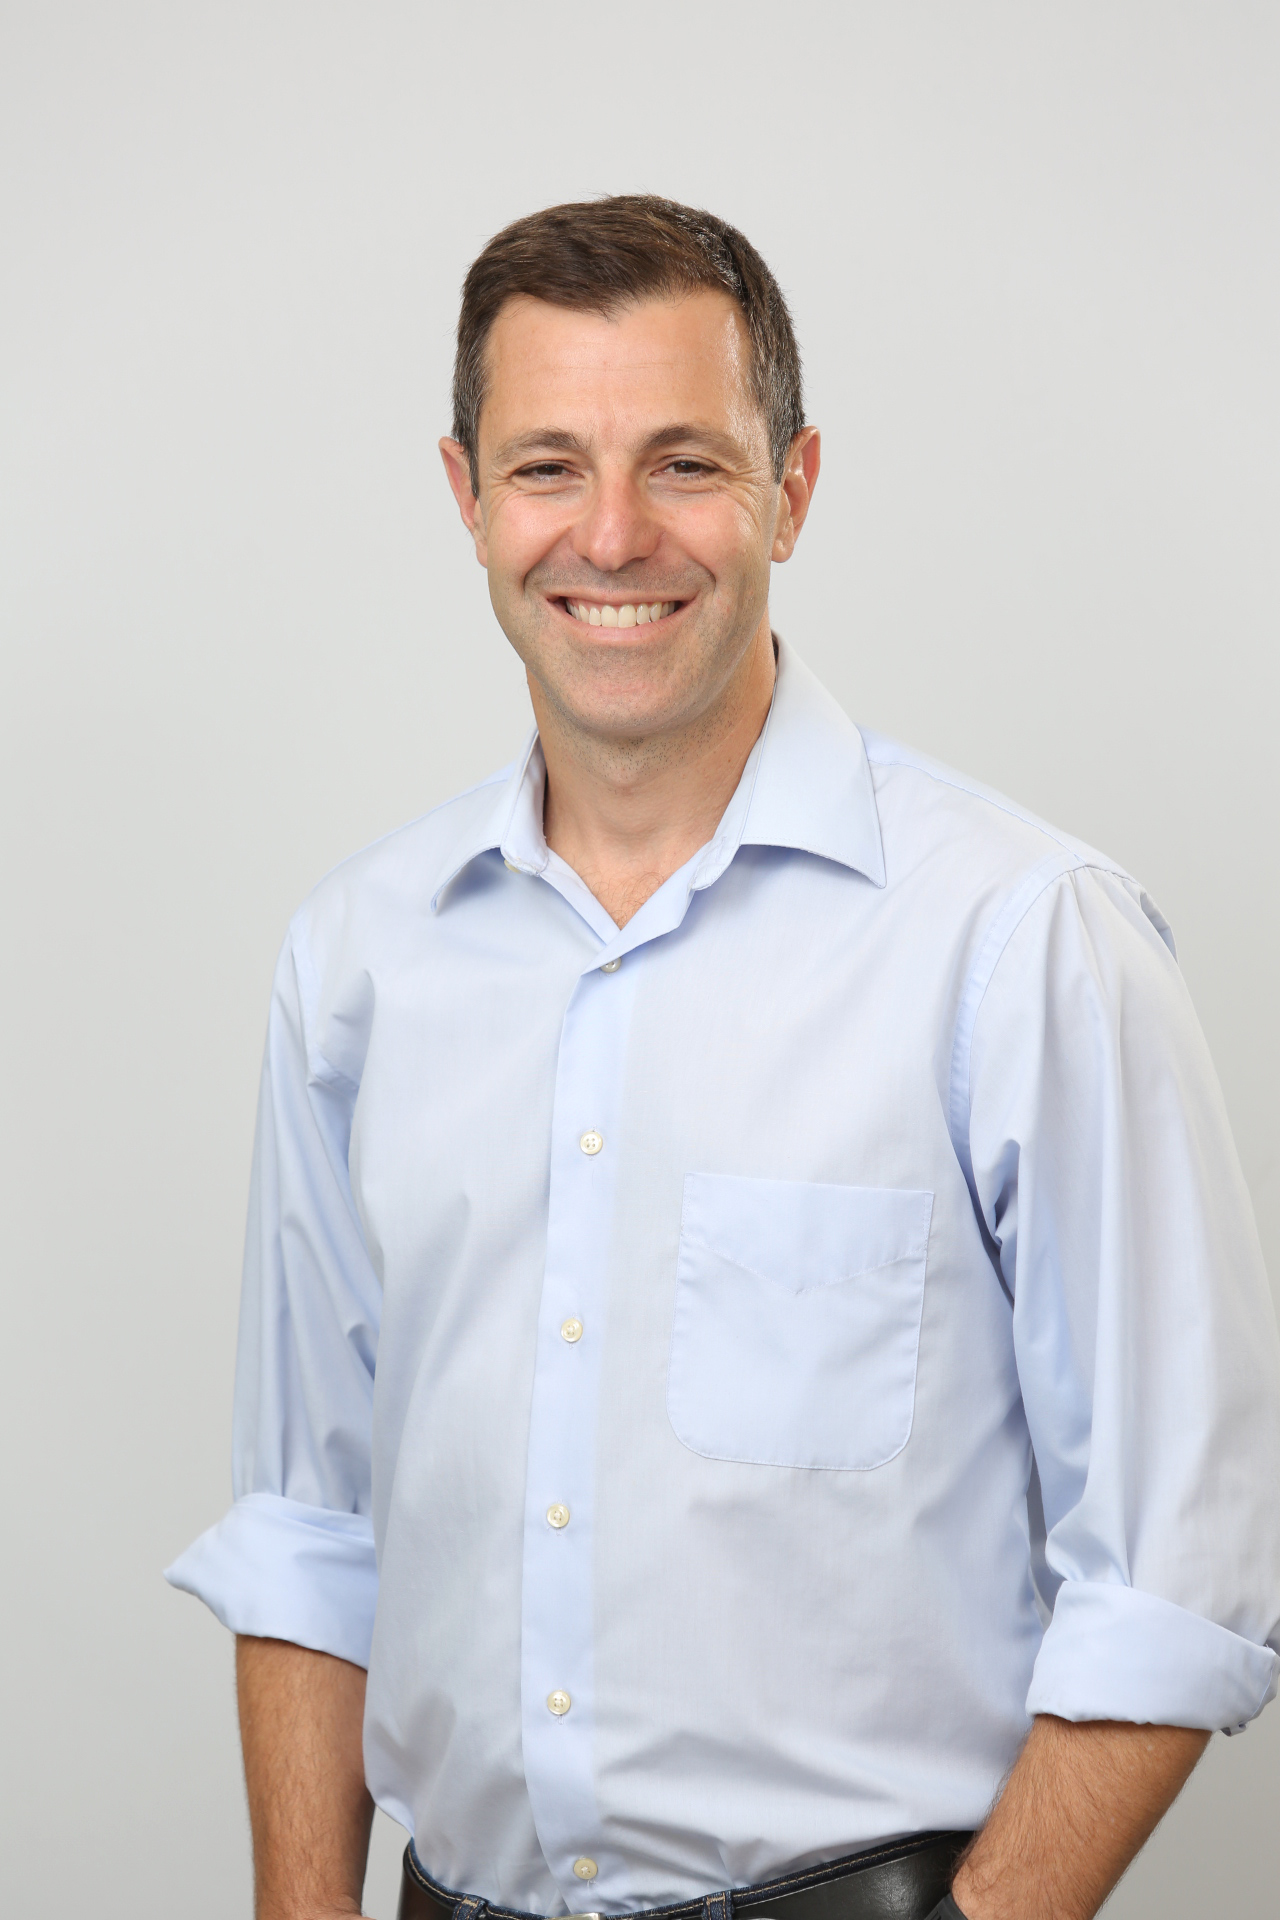 Yoni Epstein, Co-founder & CEO of Anchora Medical